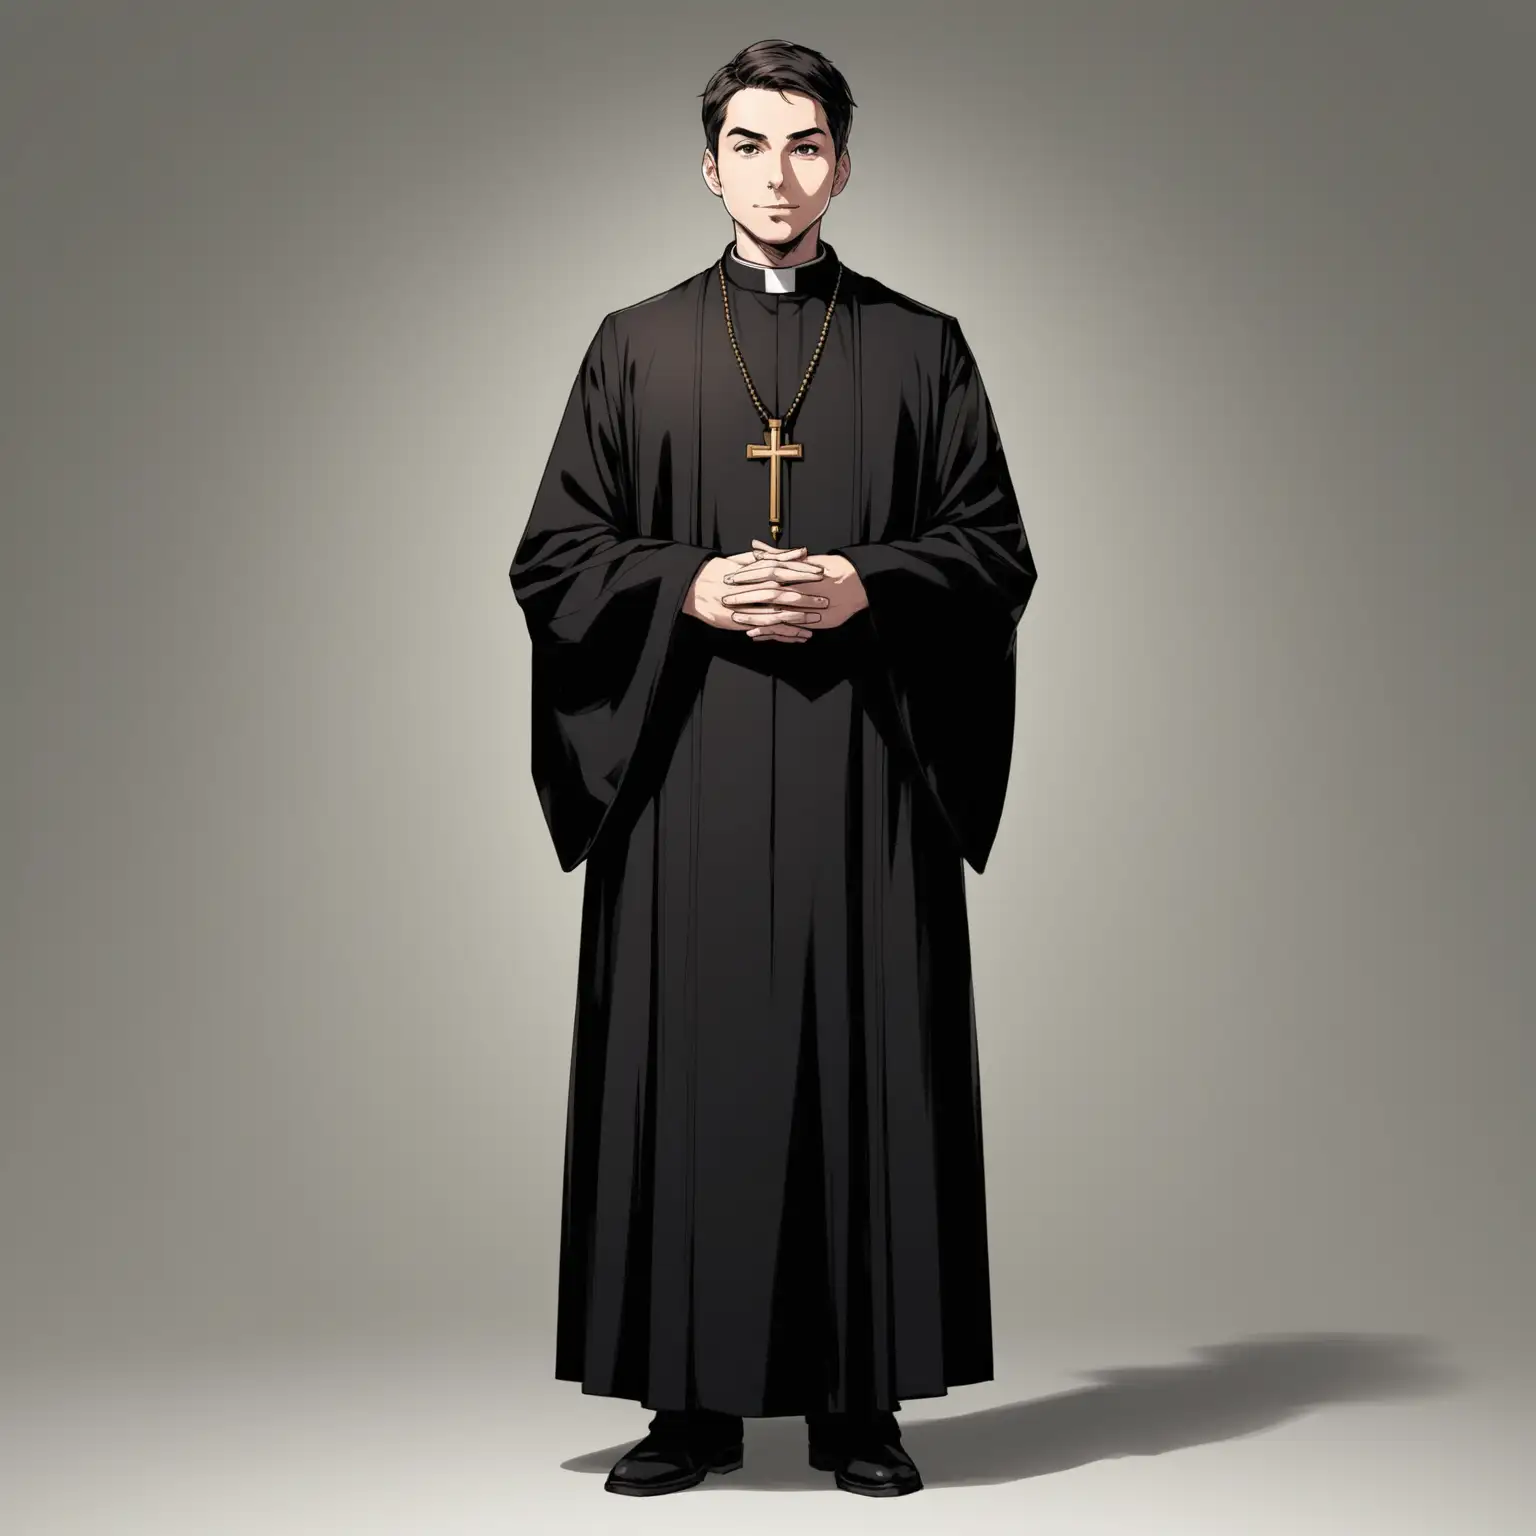 Male Priest in Black Robe on Plain Background